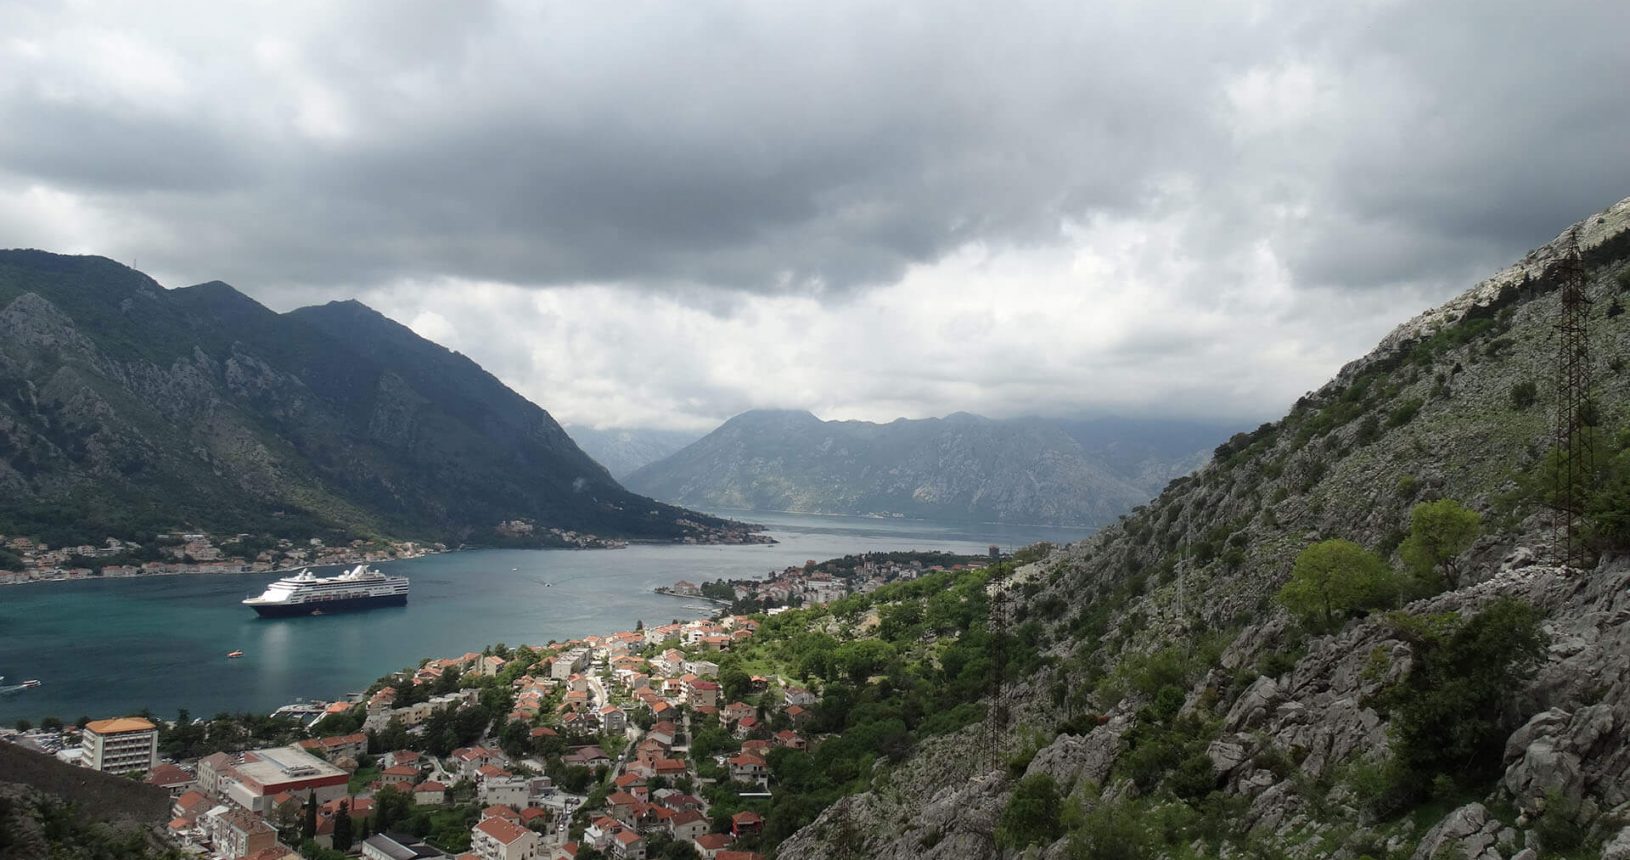 The bay of Kotor from the road to Kotor Fortress